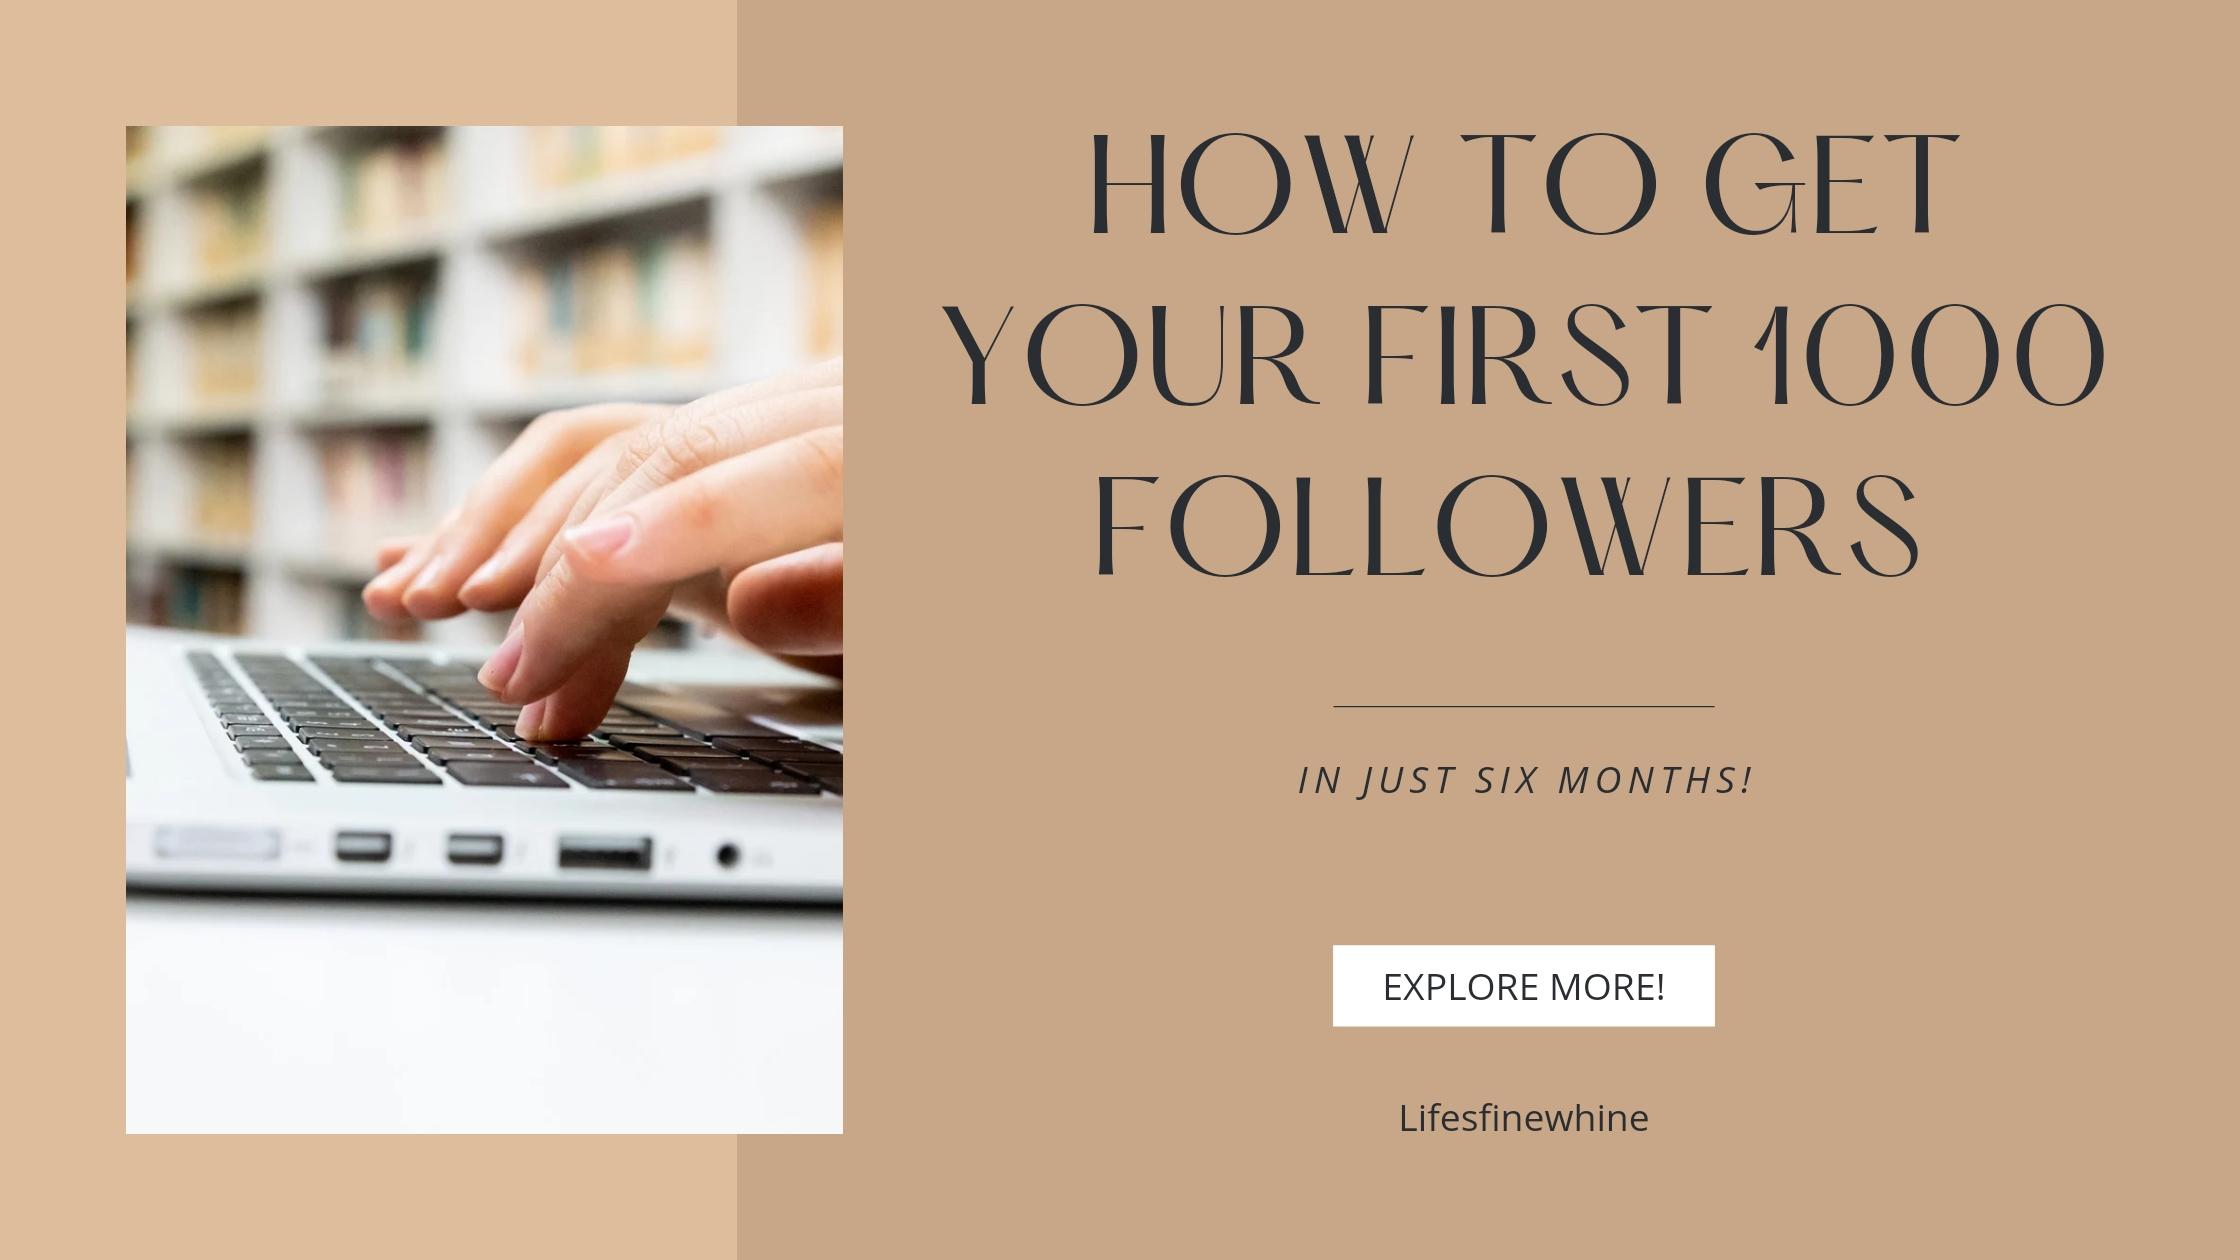 How To Get Your First 1000 Followers